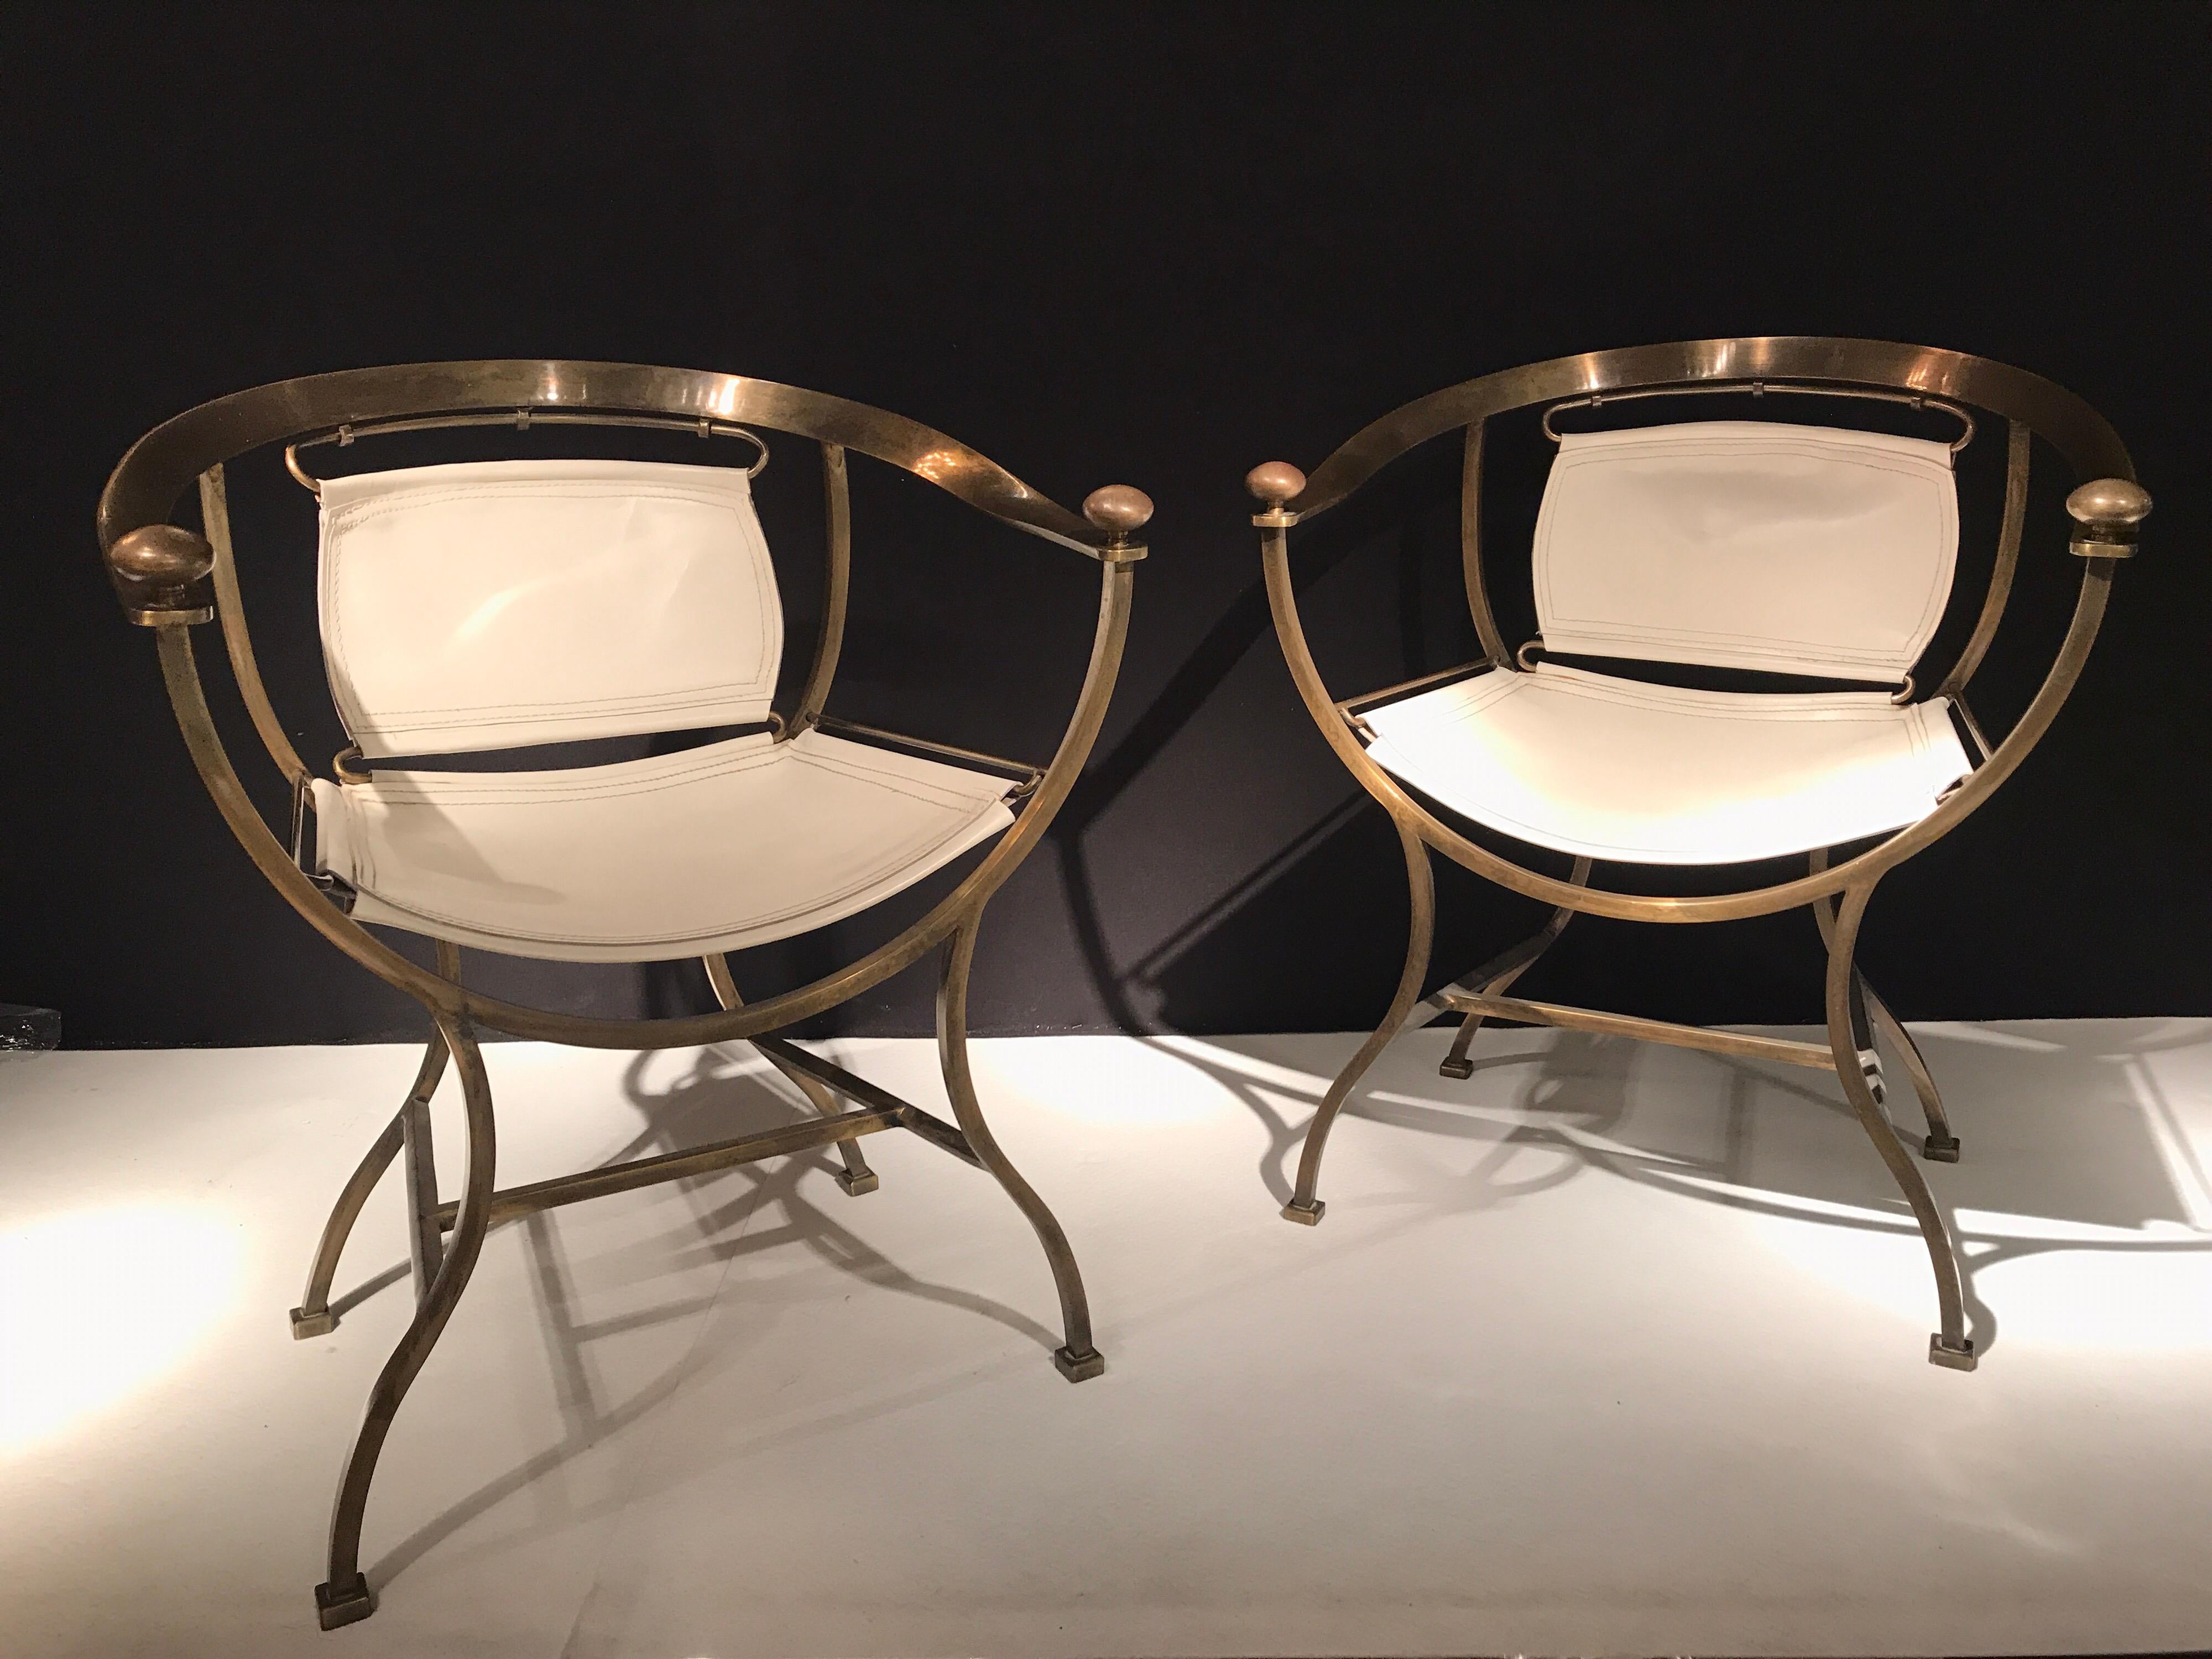 Massif brass and white leather armchairs by Alberto Orlandi, circa 1970-1980
Pompei model.